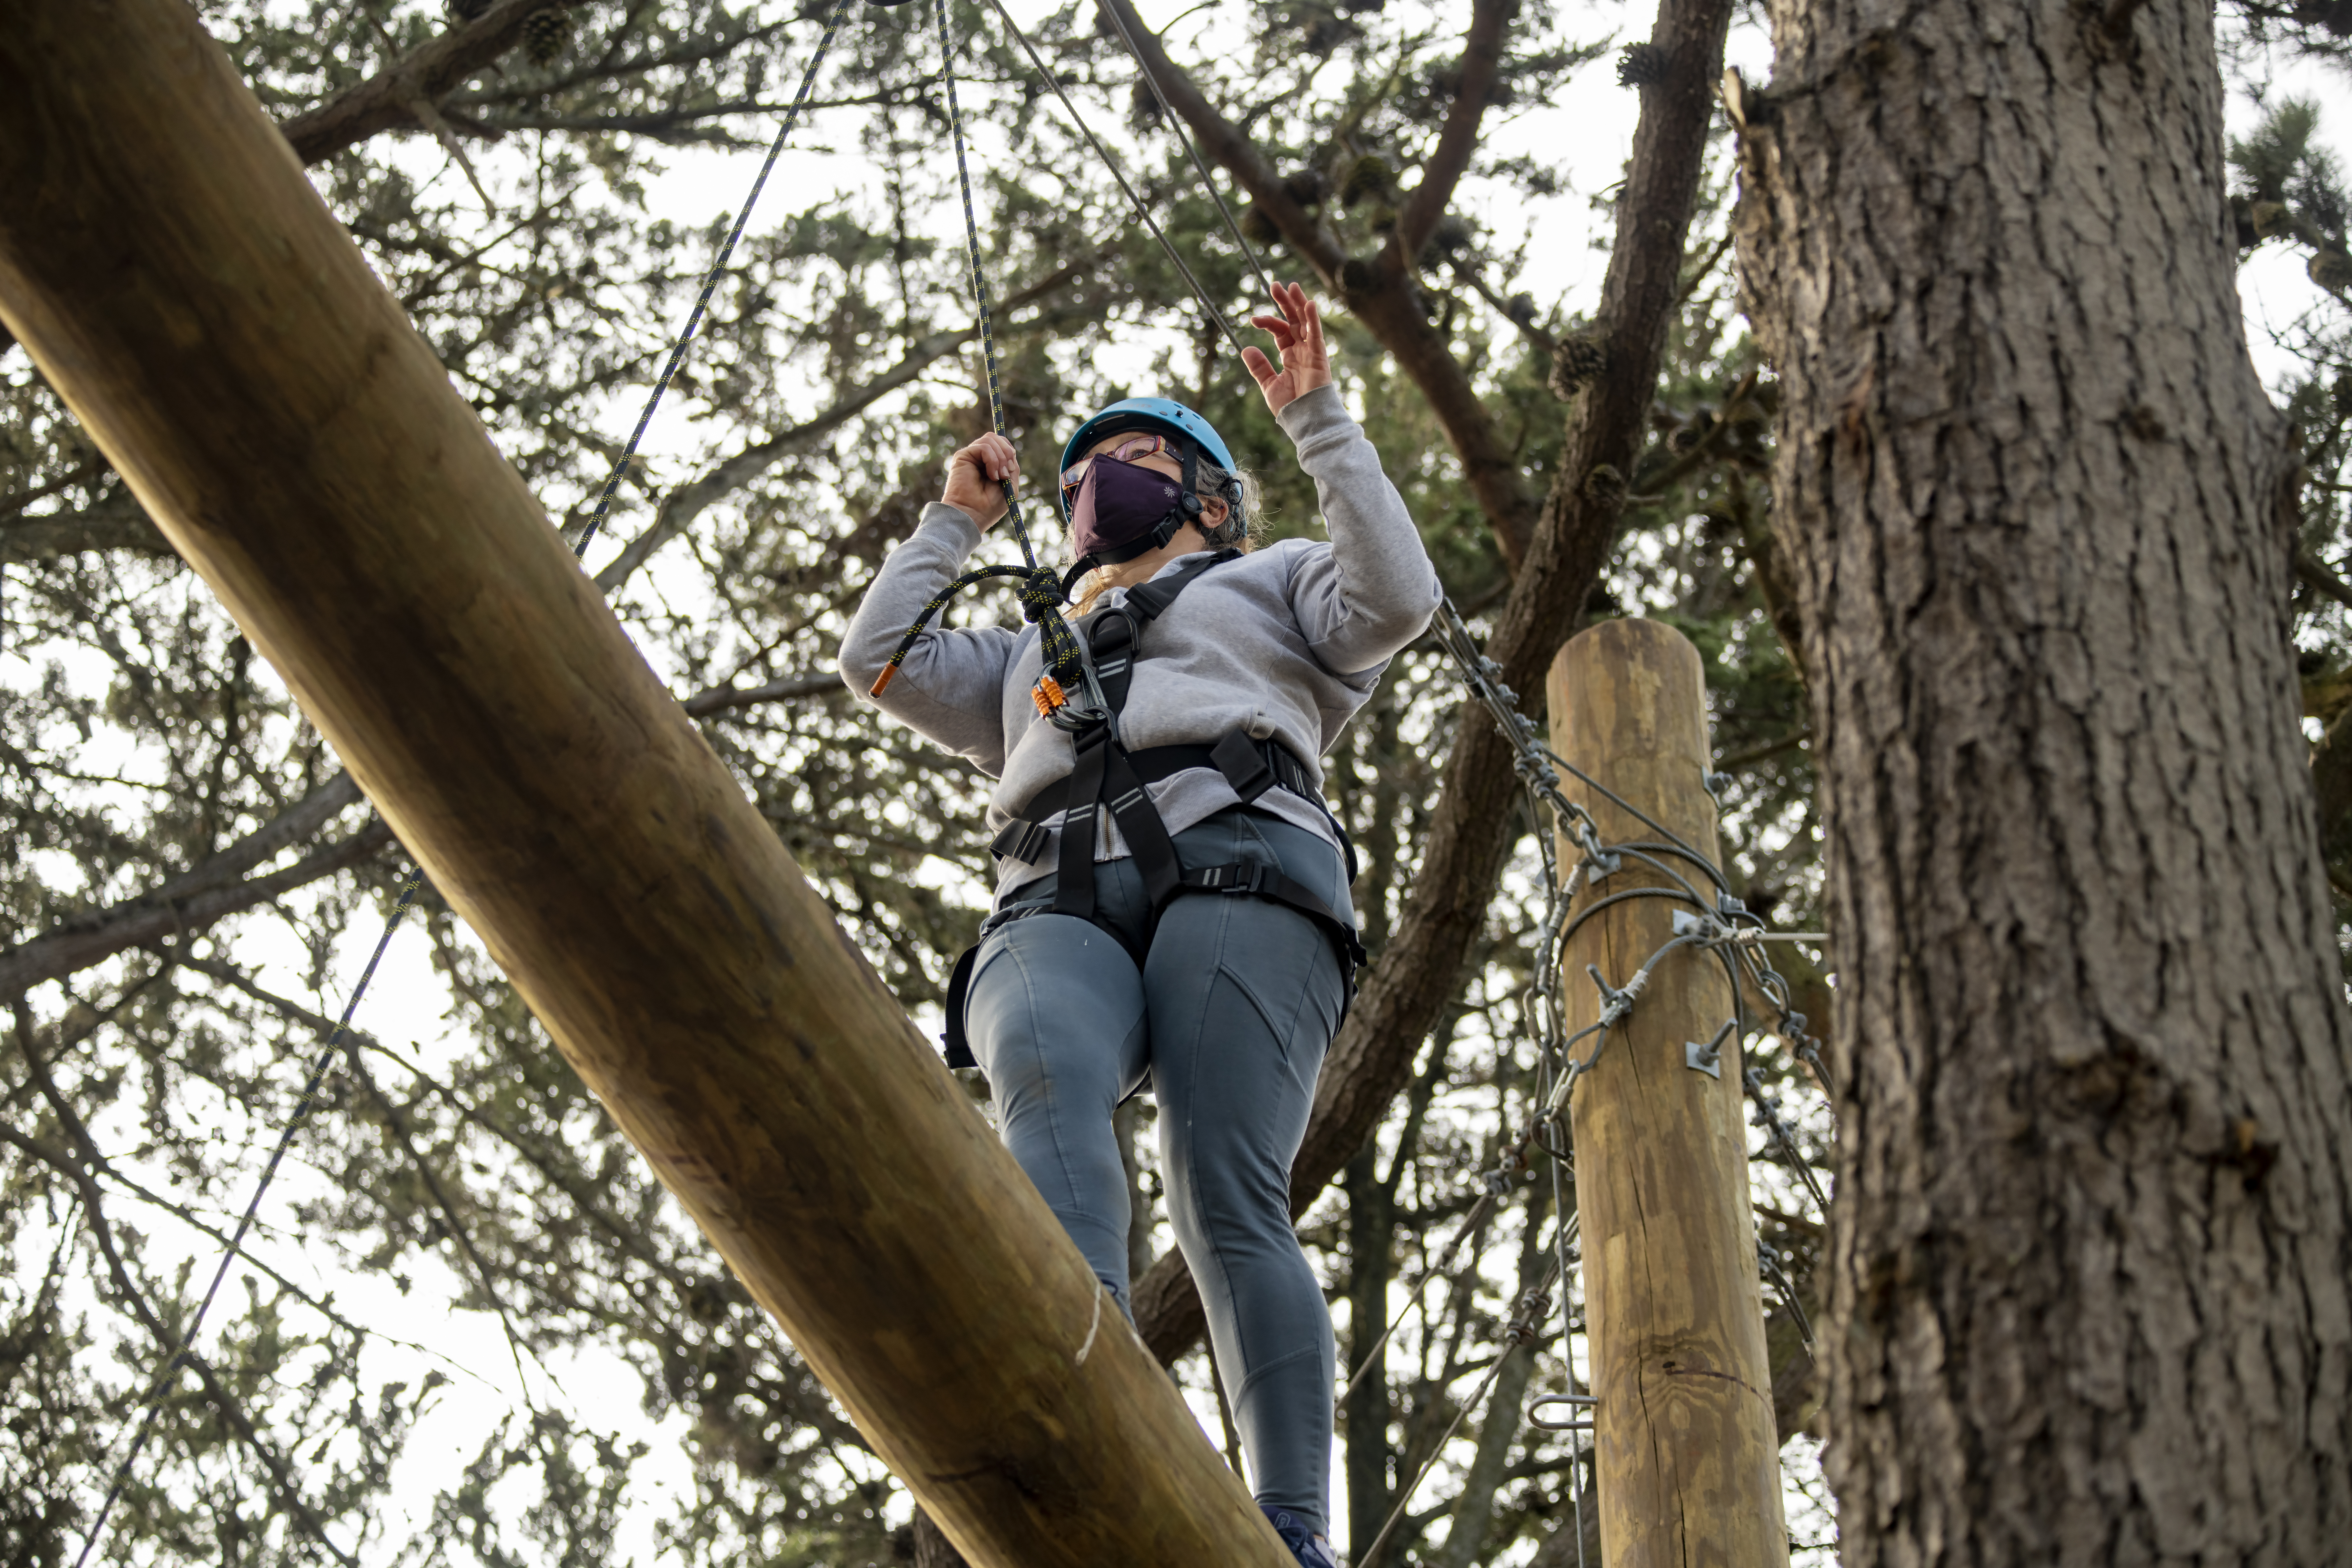 A girl balances on a log in a ropes course in the San Francisco Bay Area.